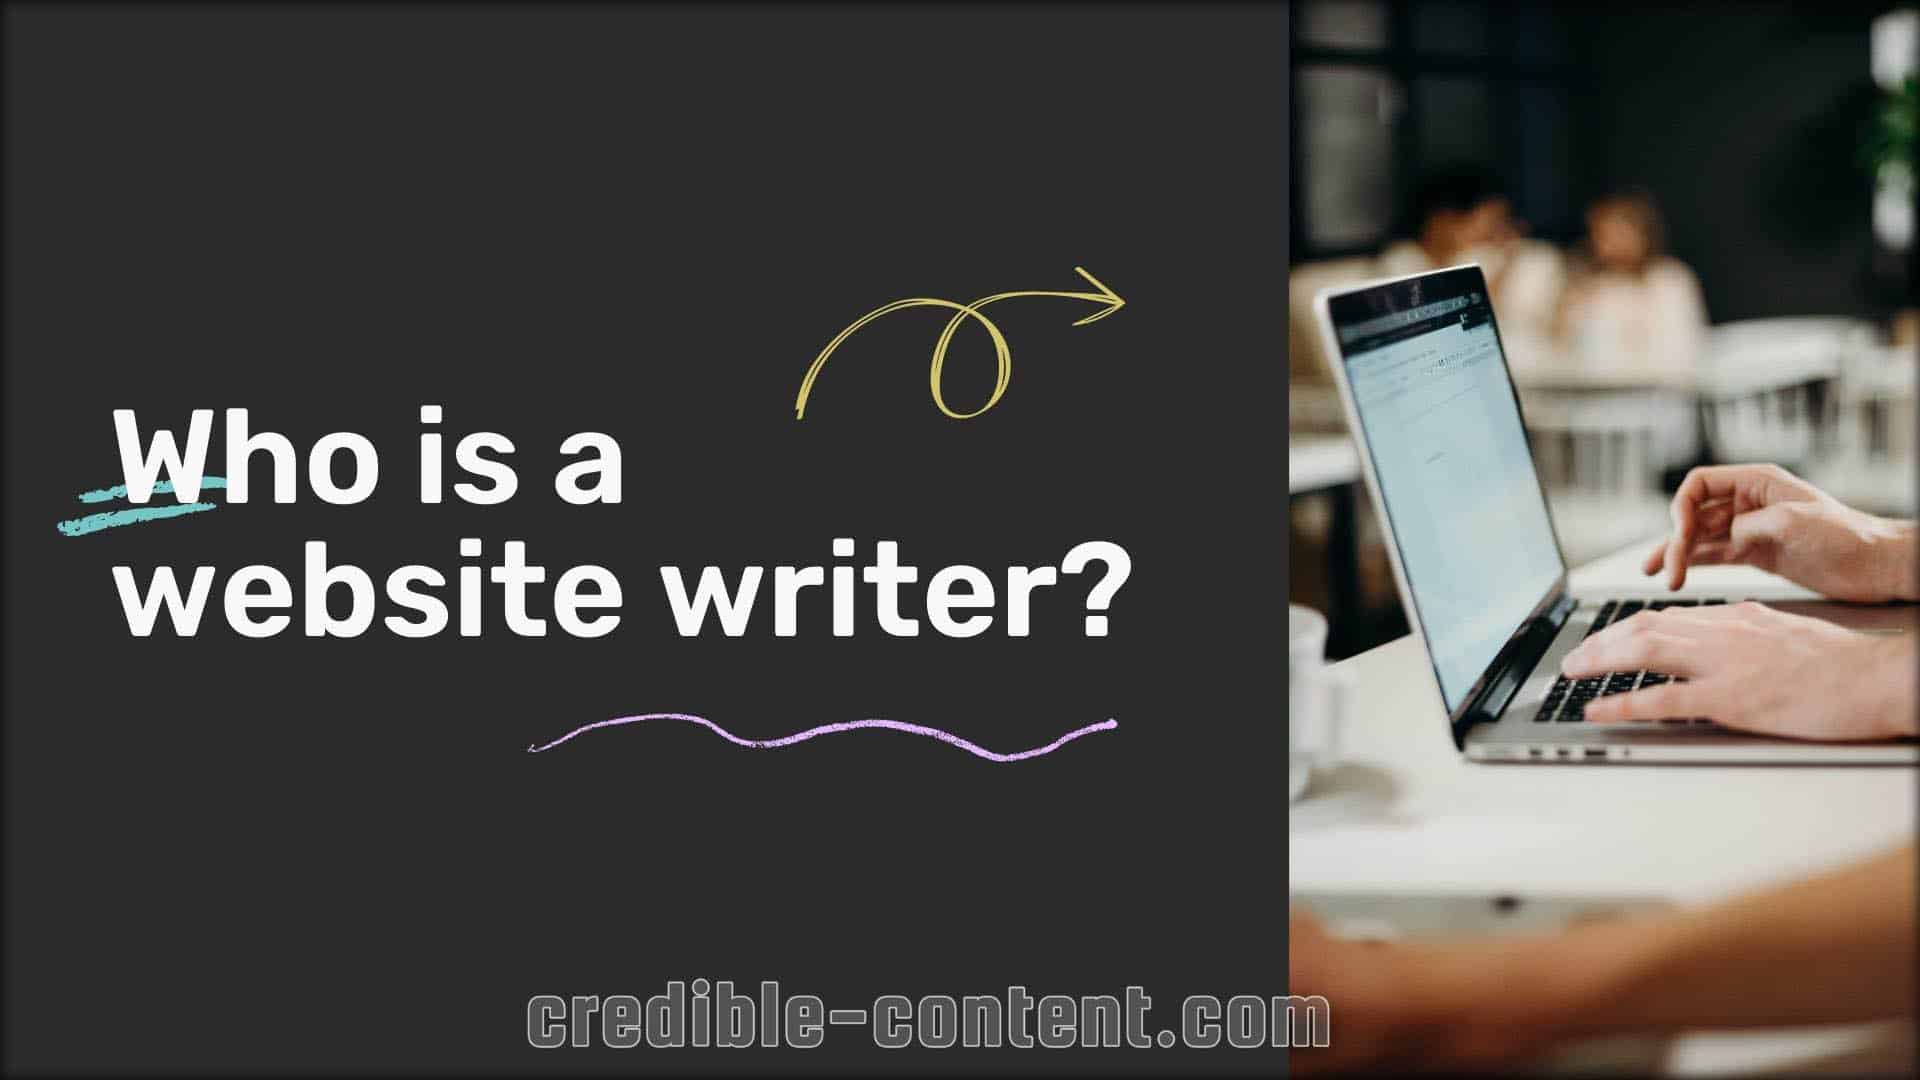 Who is a website writer